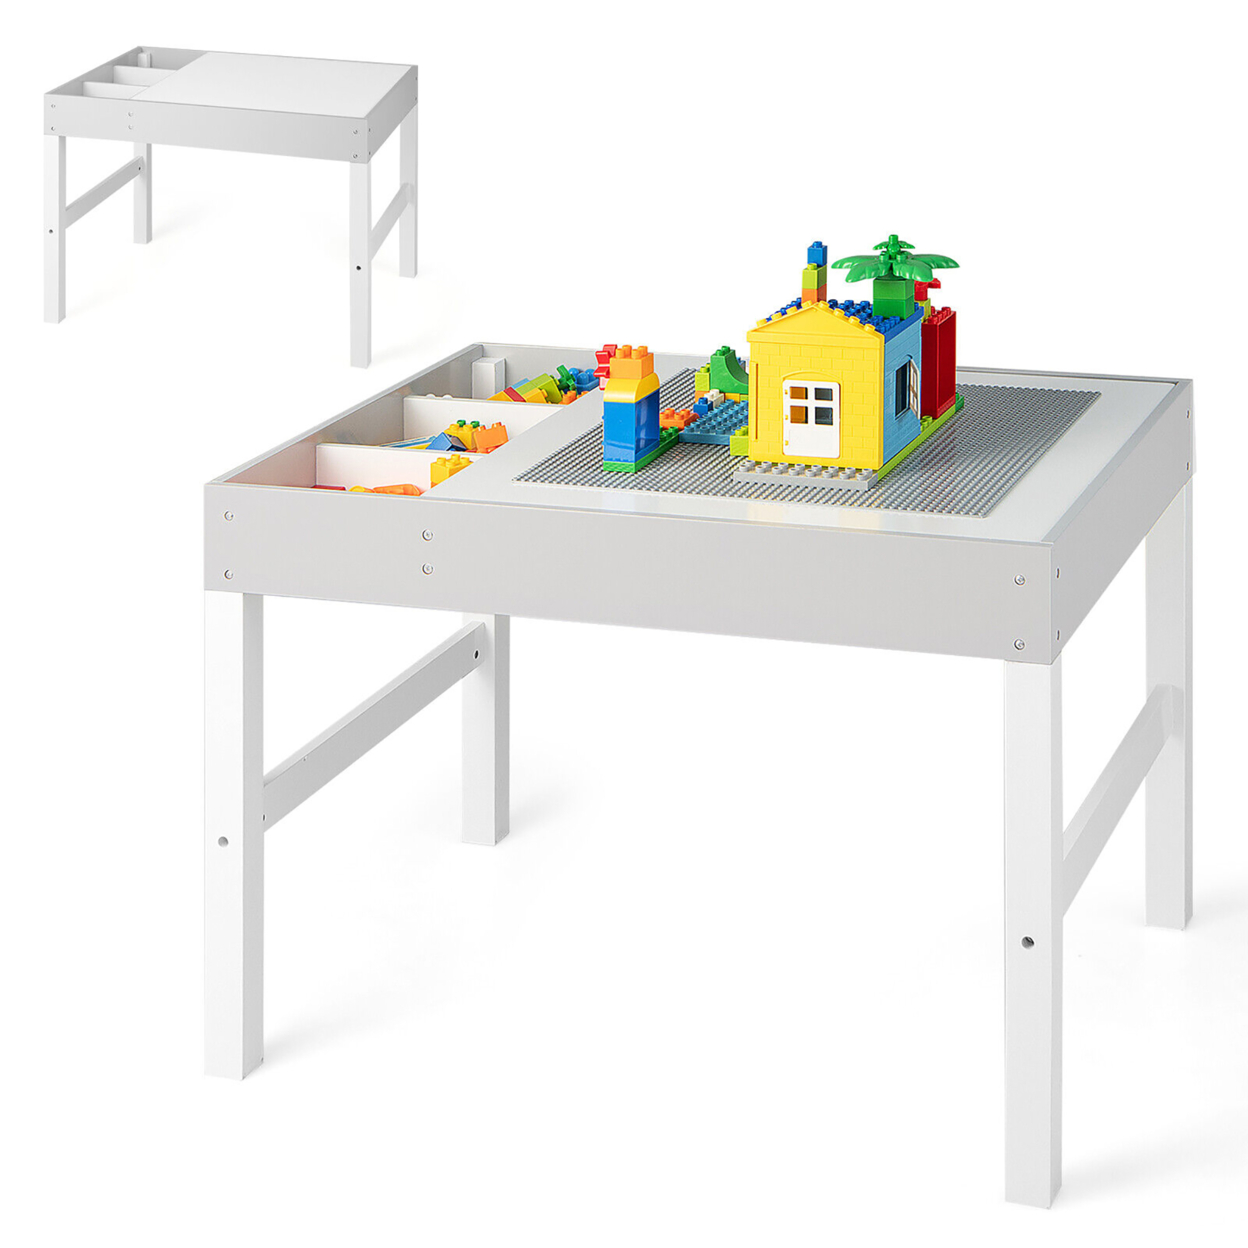 Kids Multi Activity Play Table 3 In 1 Wooden Building Block Desk W/ Storage Gift